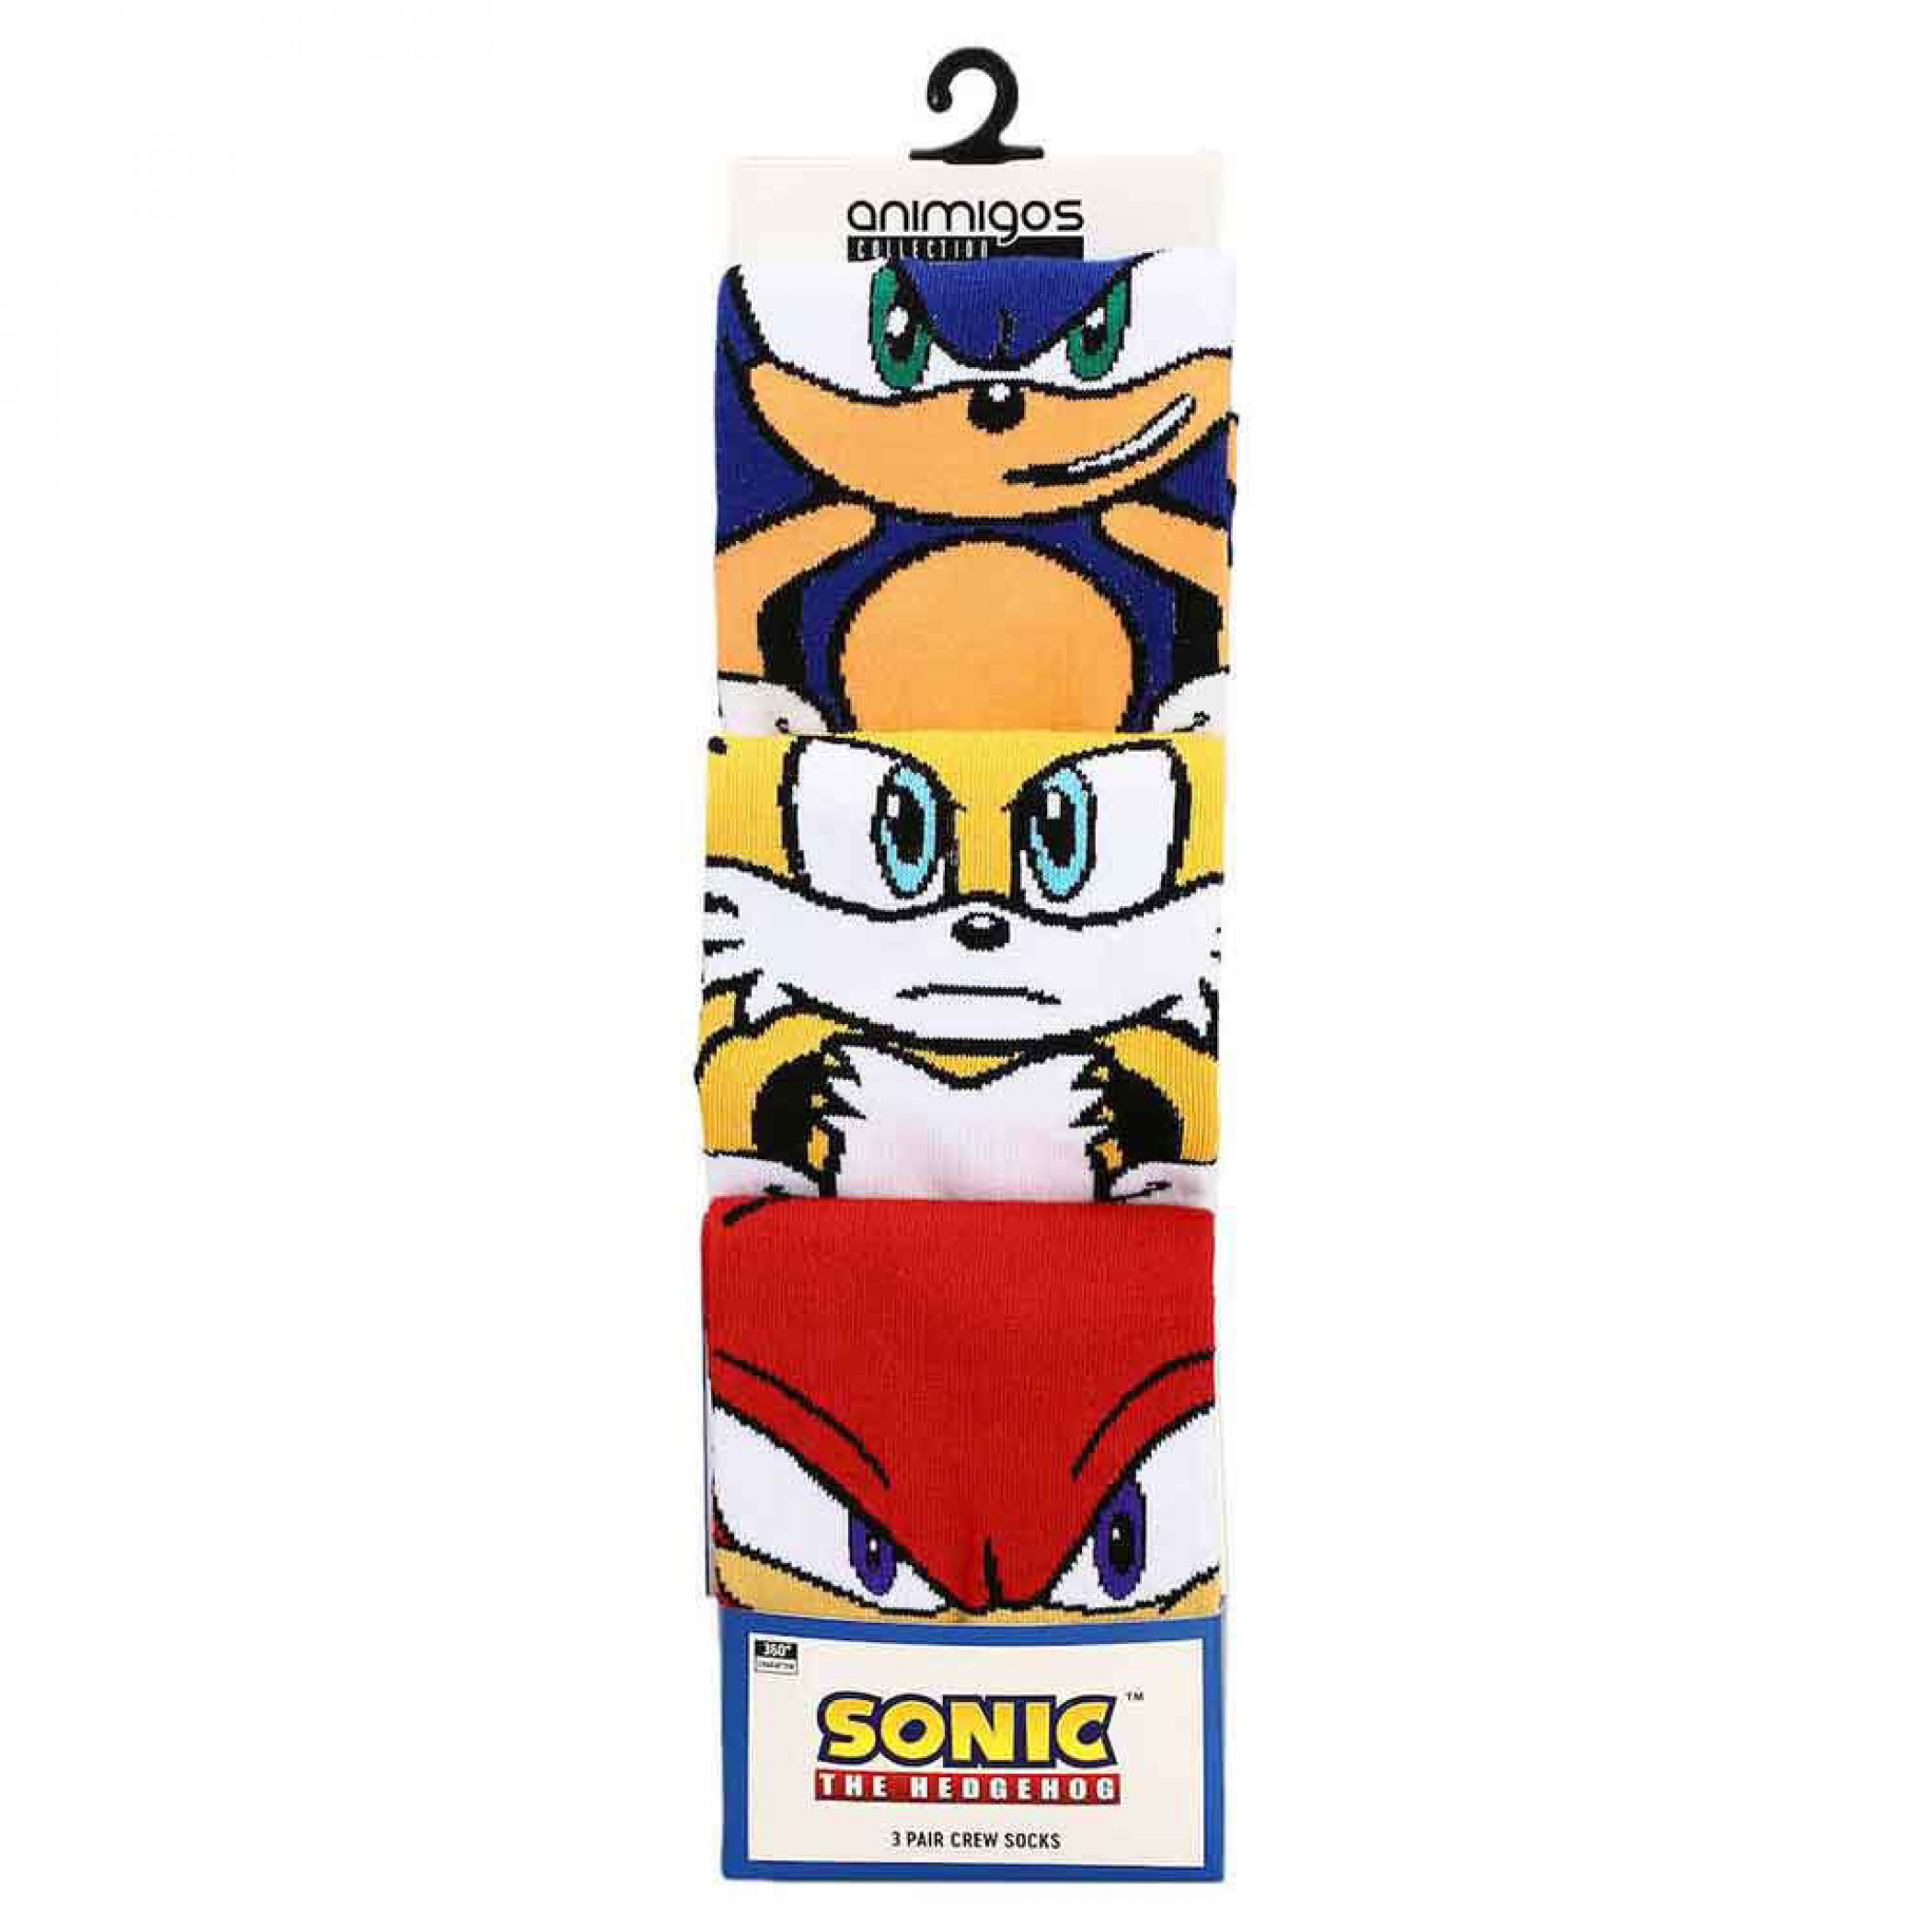 Sonic The Hedgehog, Tails and Knuckles 3-Pair Pack of Crew Socks